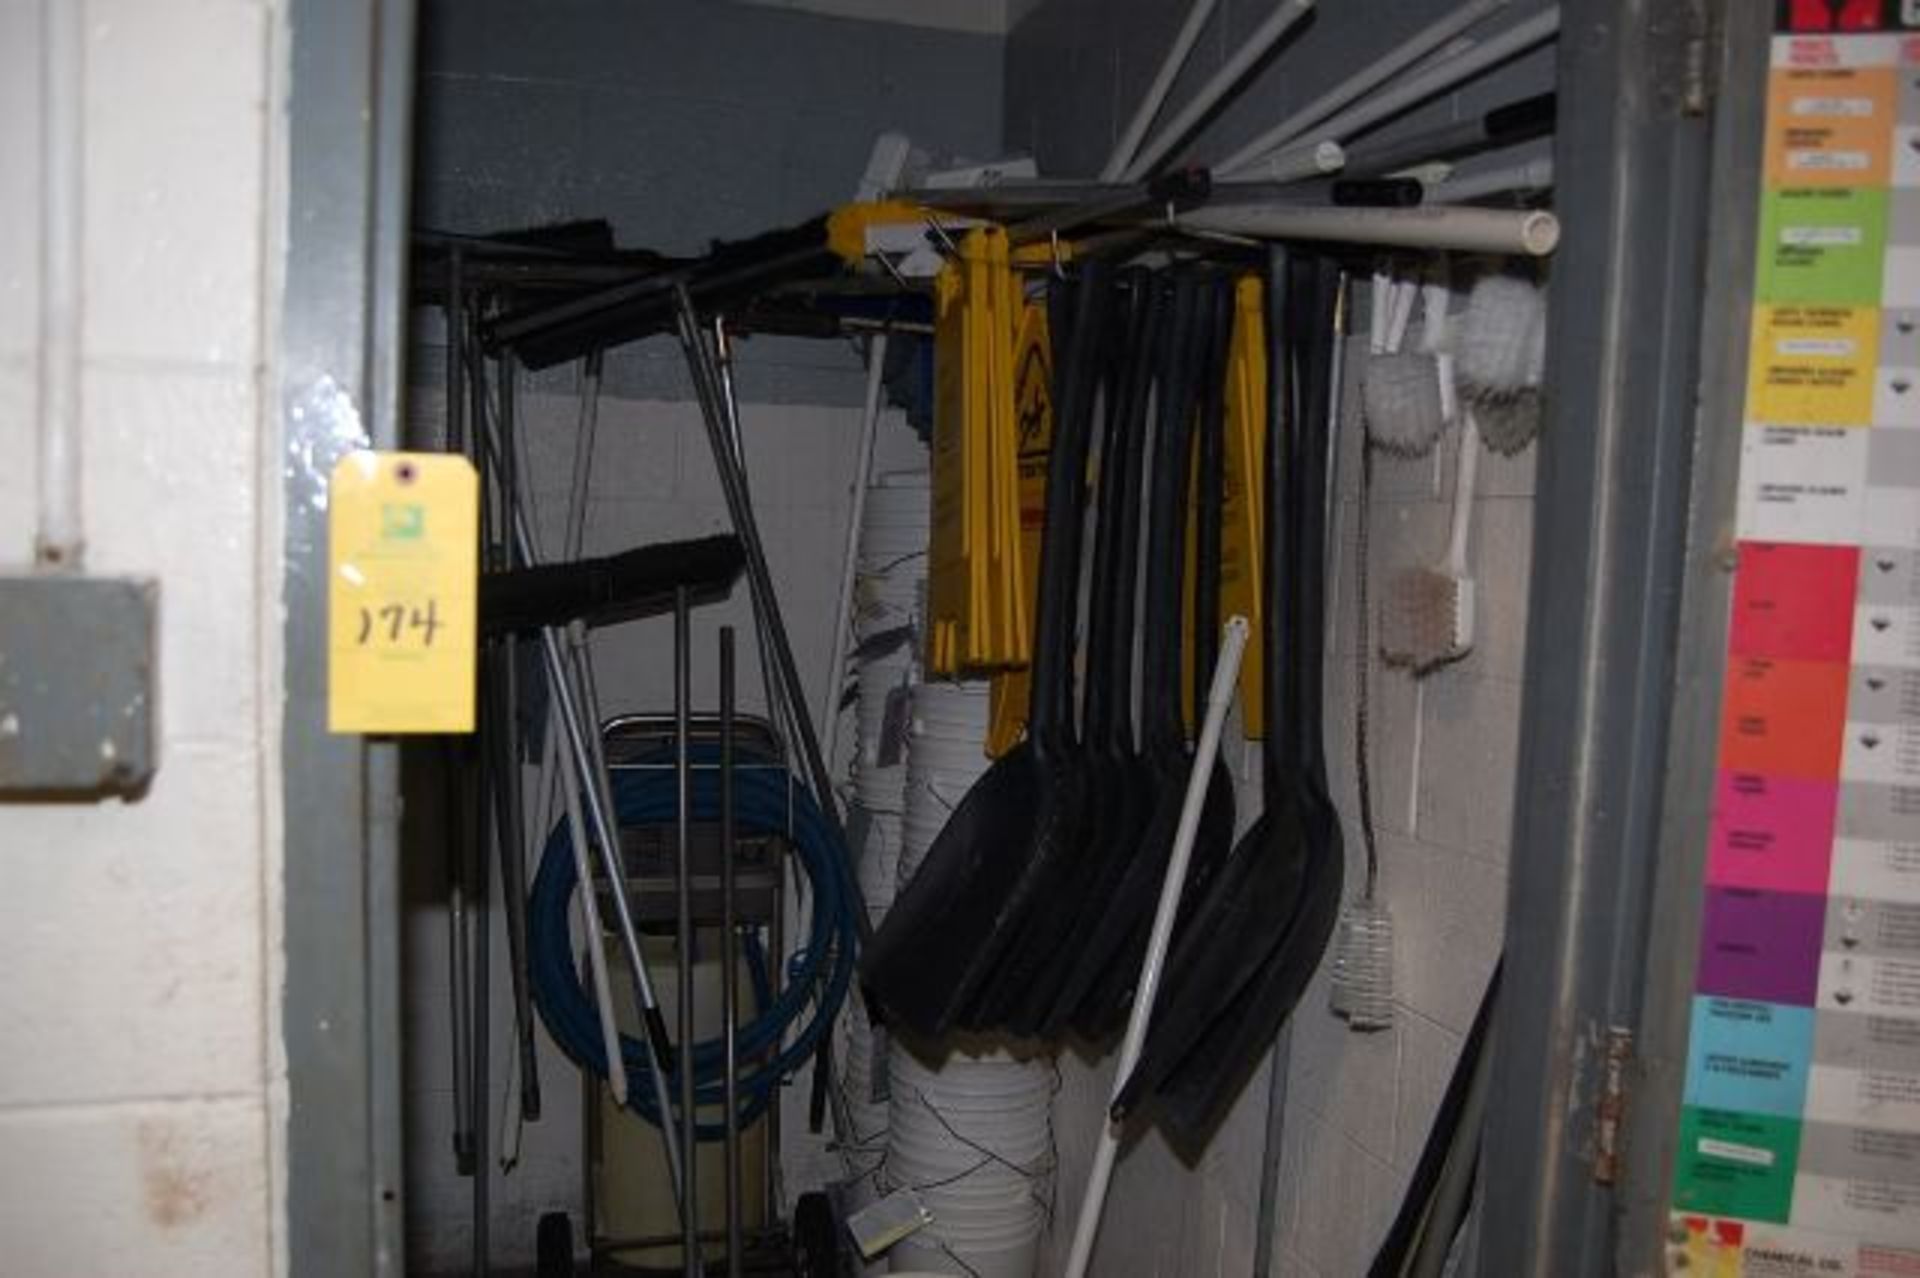 Cleaning Supply Room Storage Contents - Poly Tank, Hydrite Supplies, Shovels, Buckets, RIGGING FEE: - Image 2 of 2